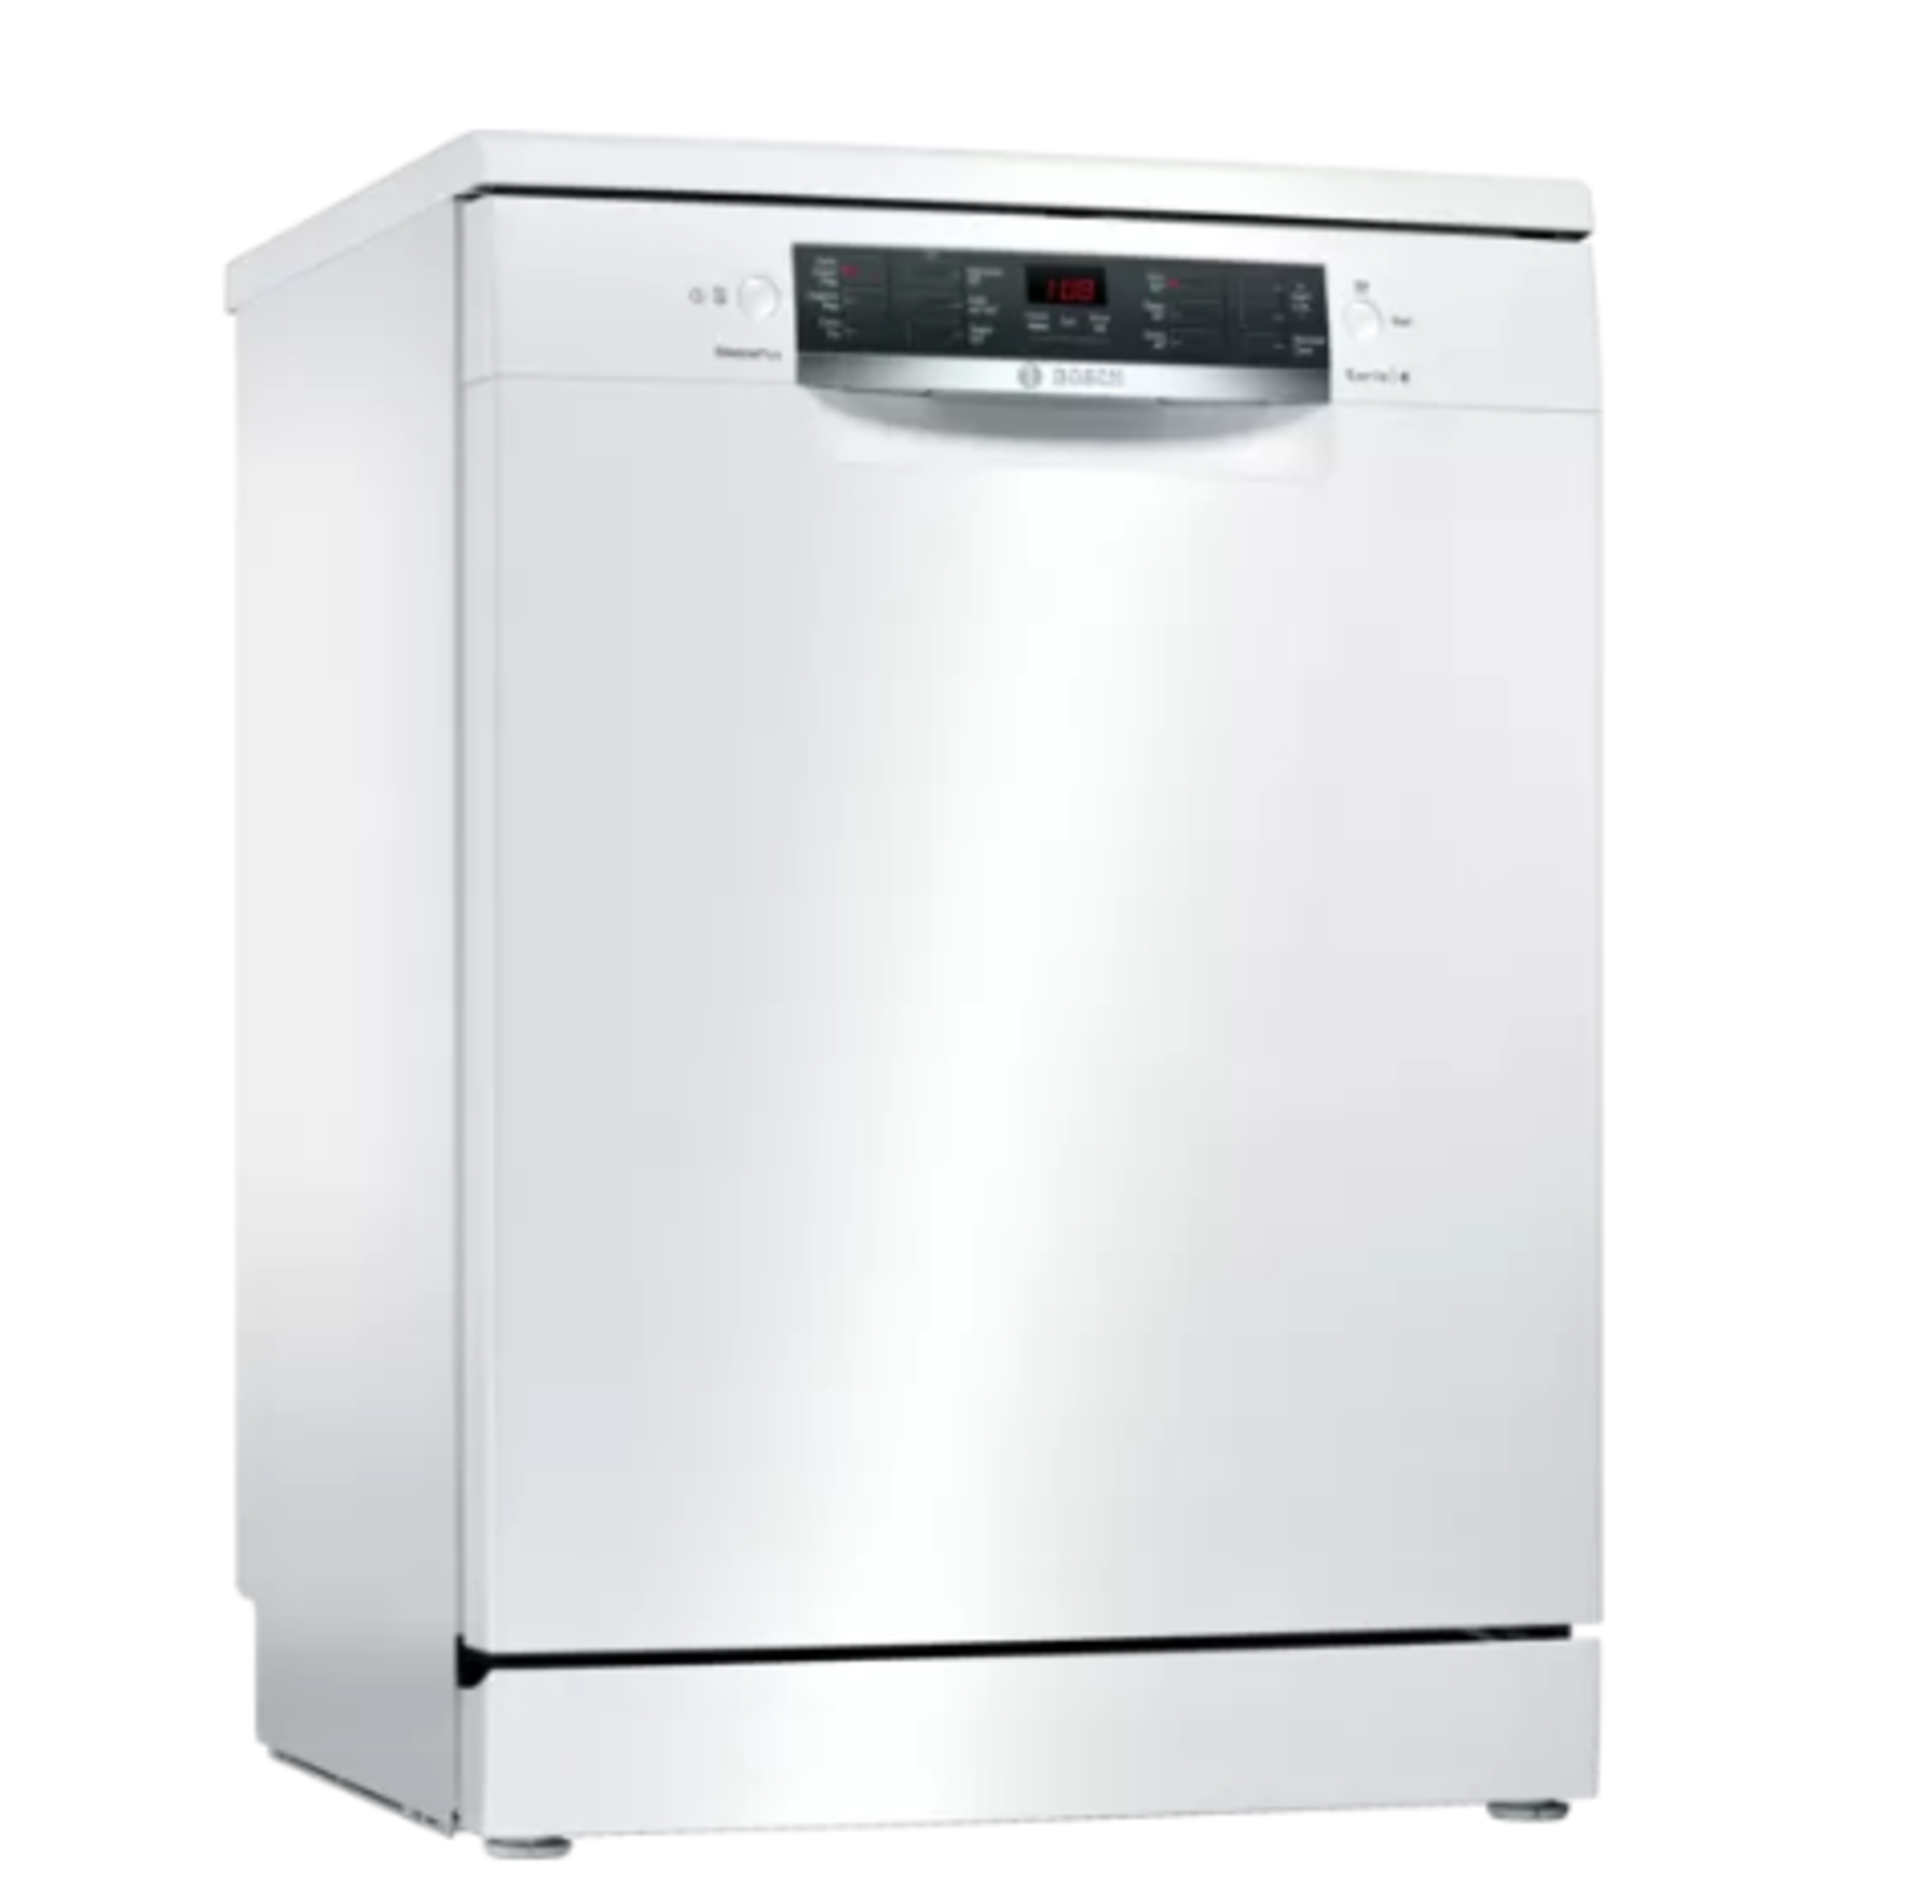 GRADED Bosch Serie 4 Silence Plus Dishwasher sms46iw03g RRP £620